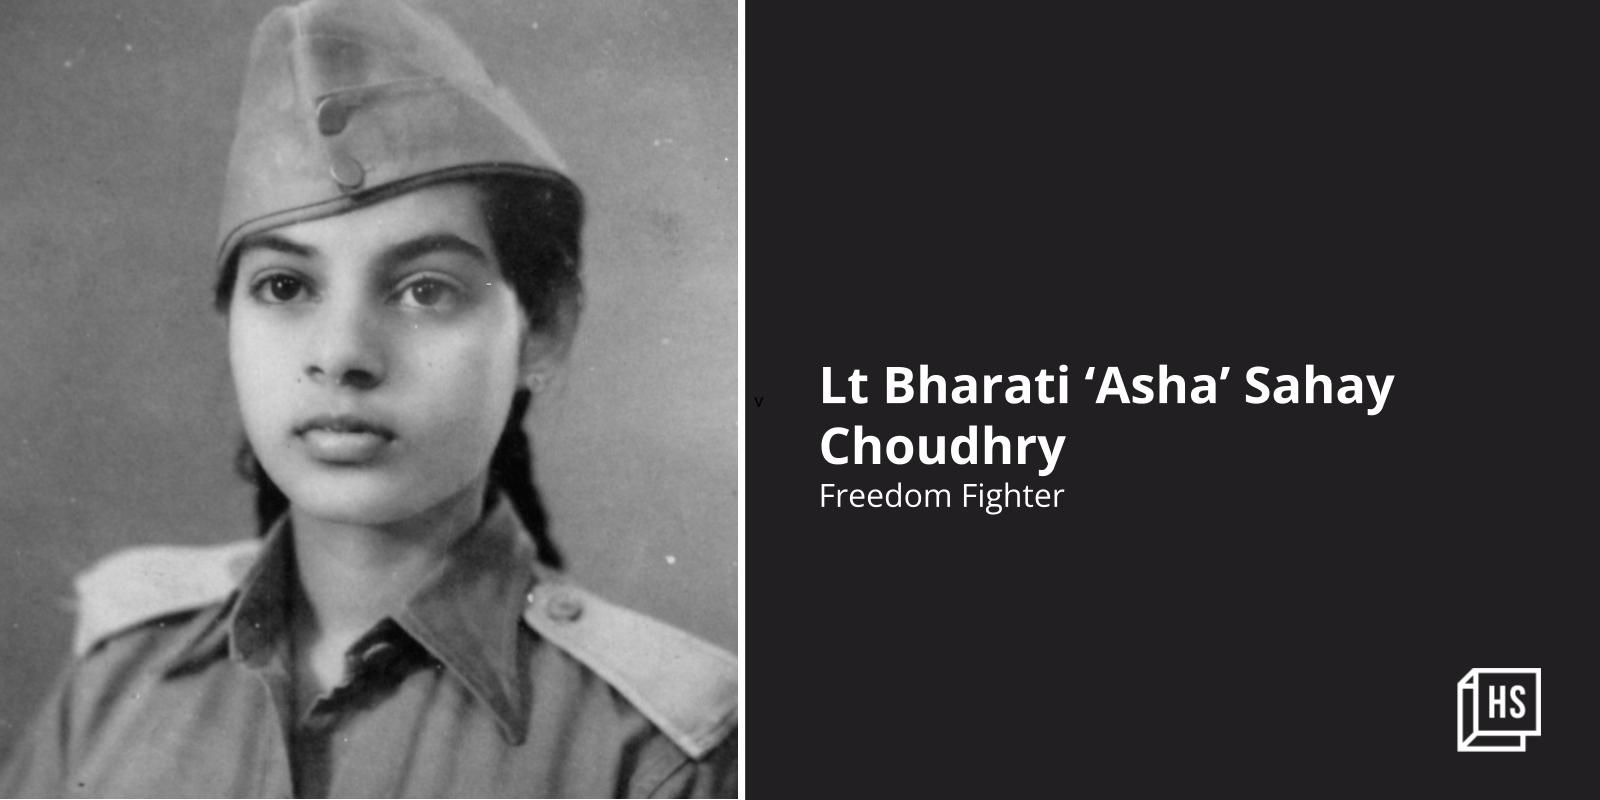 War diary: This book chronicles the life of 17-year-old Asha-san’s life in Netaji’s Indian National Army

